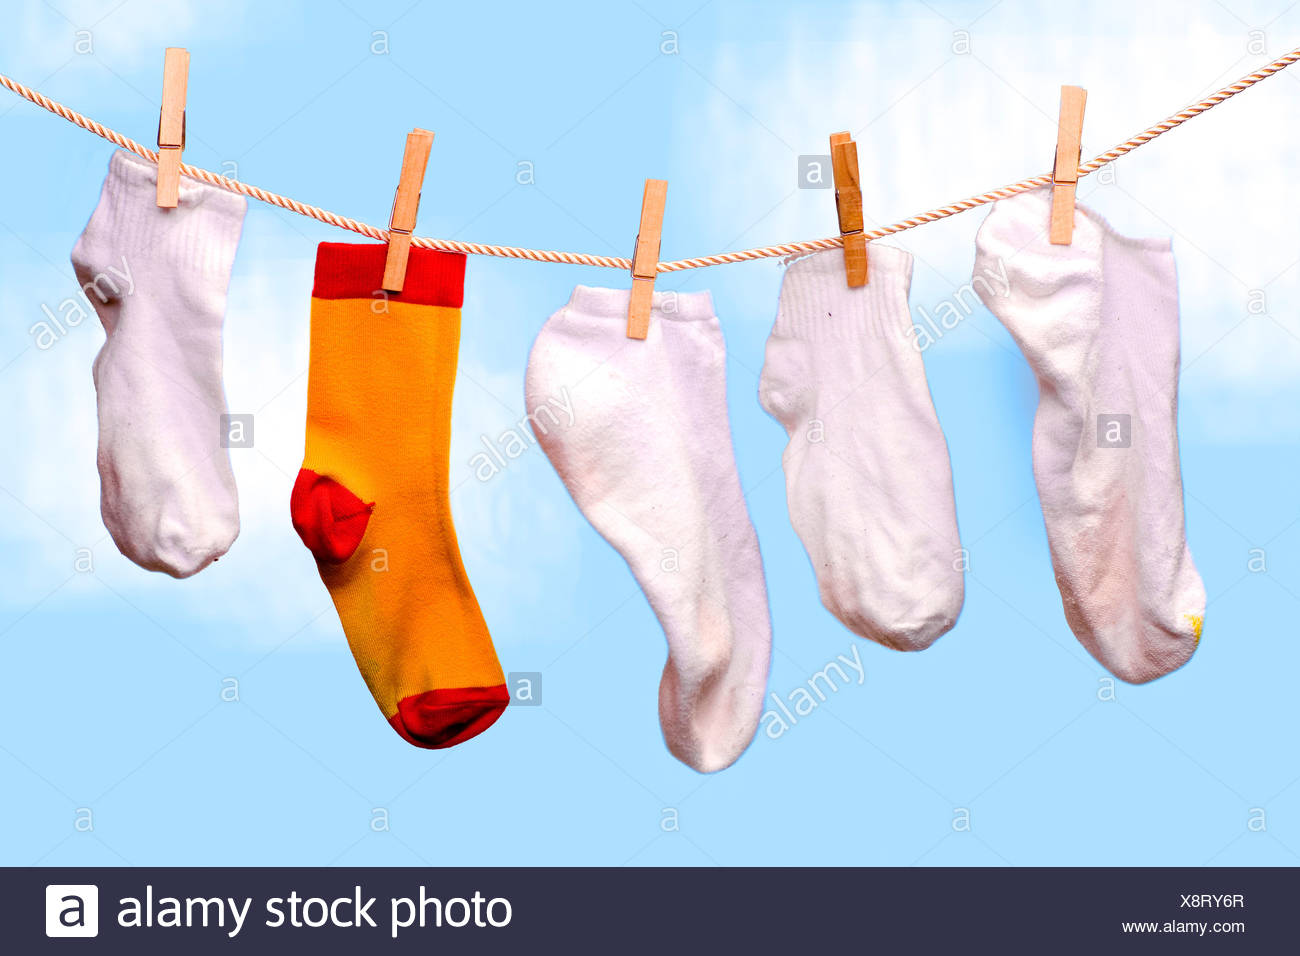 Socks Clothes Line High Resolution Stock Photography and Images - Alamy